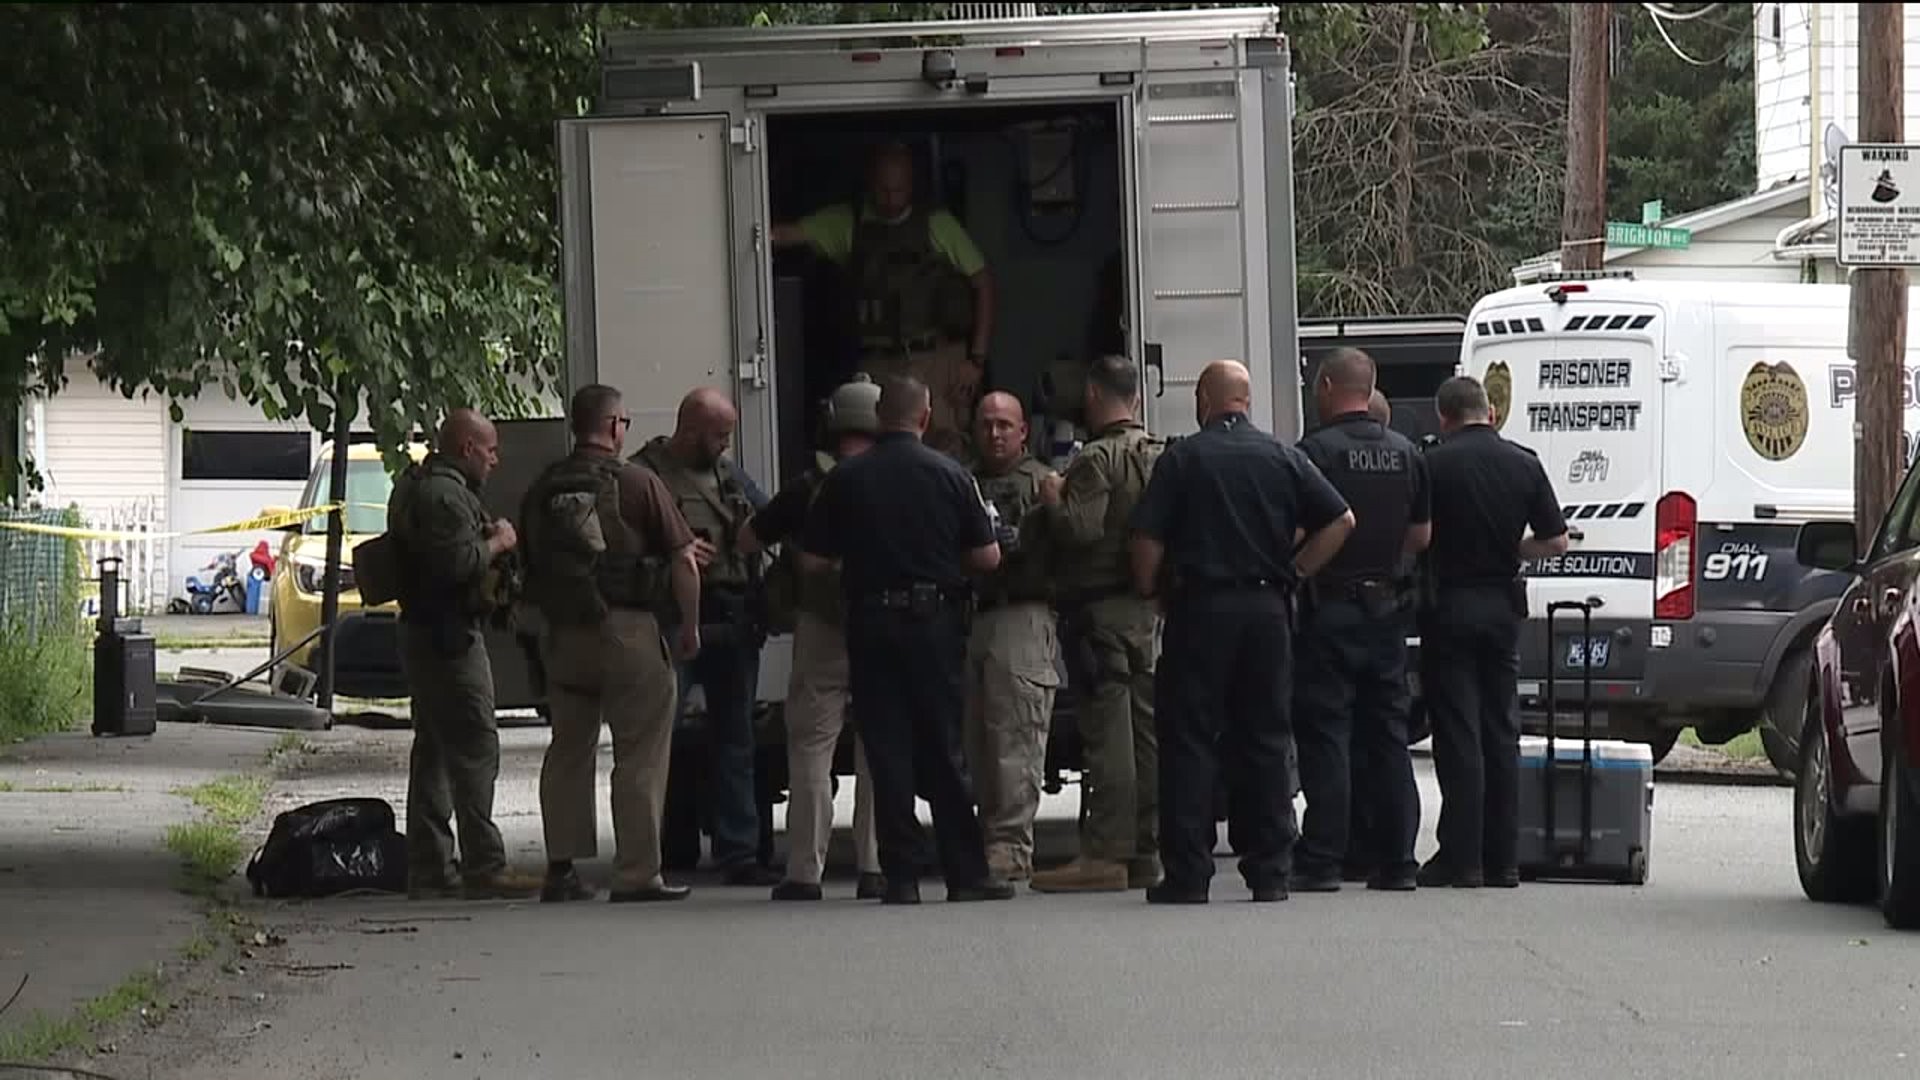 Police Standoff in Scranton Ends with Man Taking Own Life